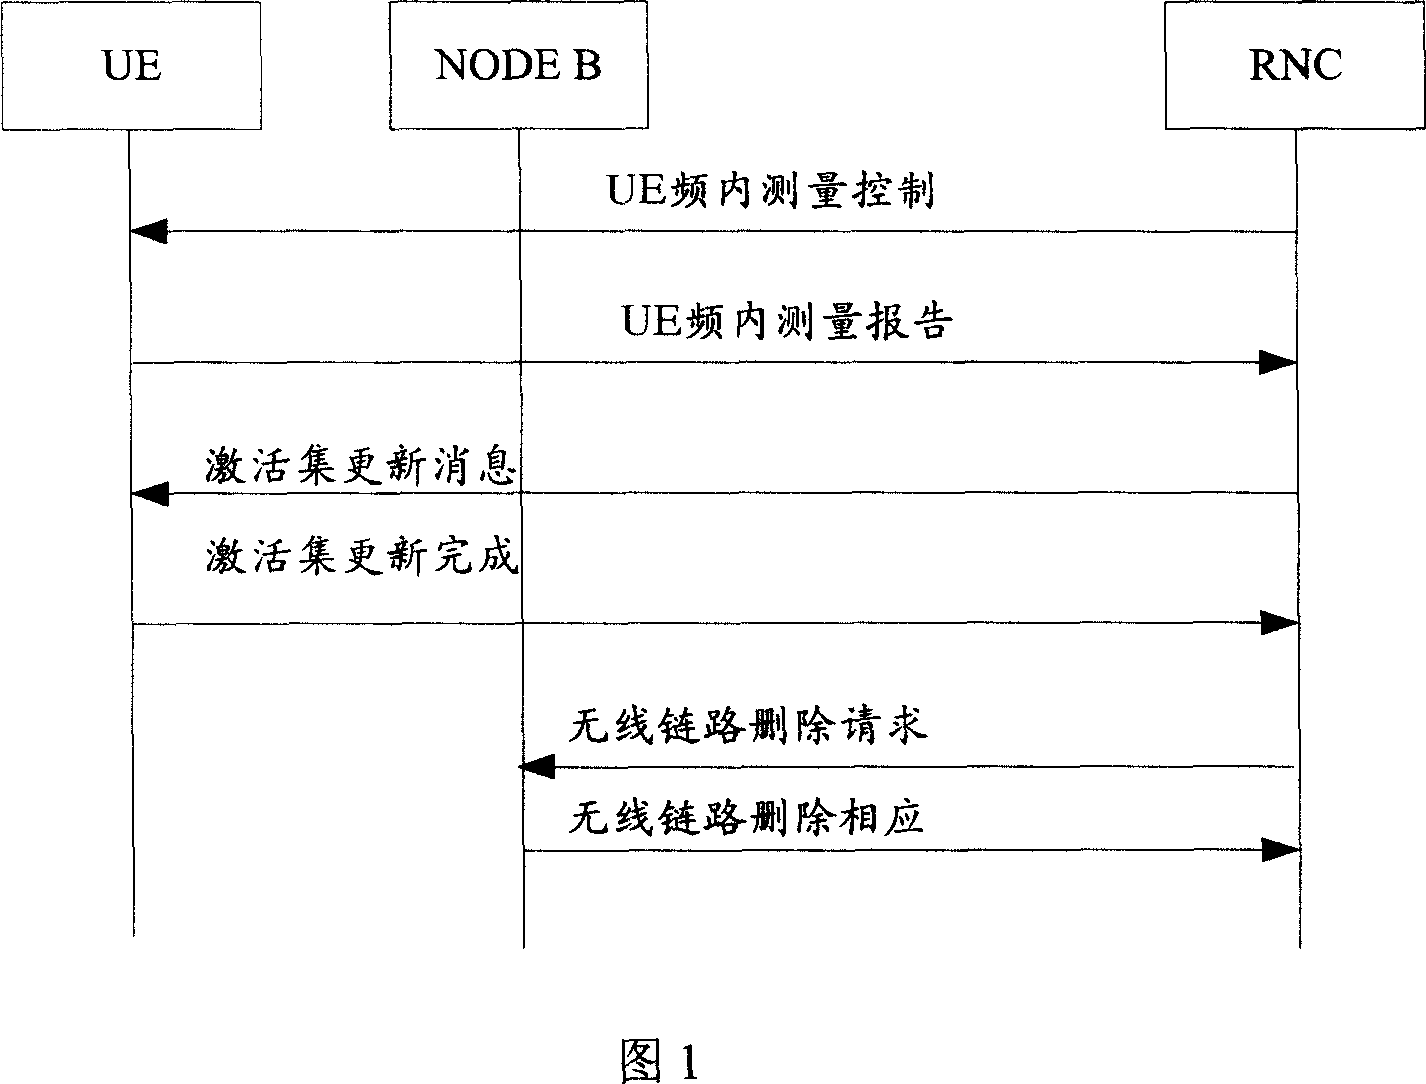 Method for overcoming soft handoff dropped call in third generation mobile communication system